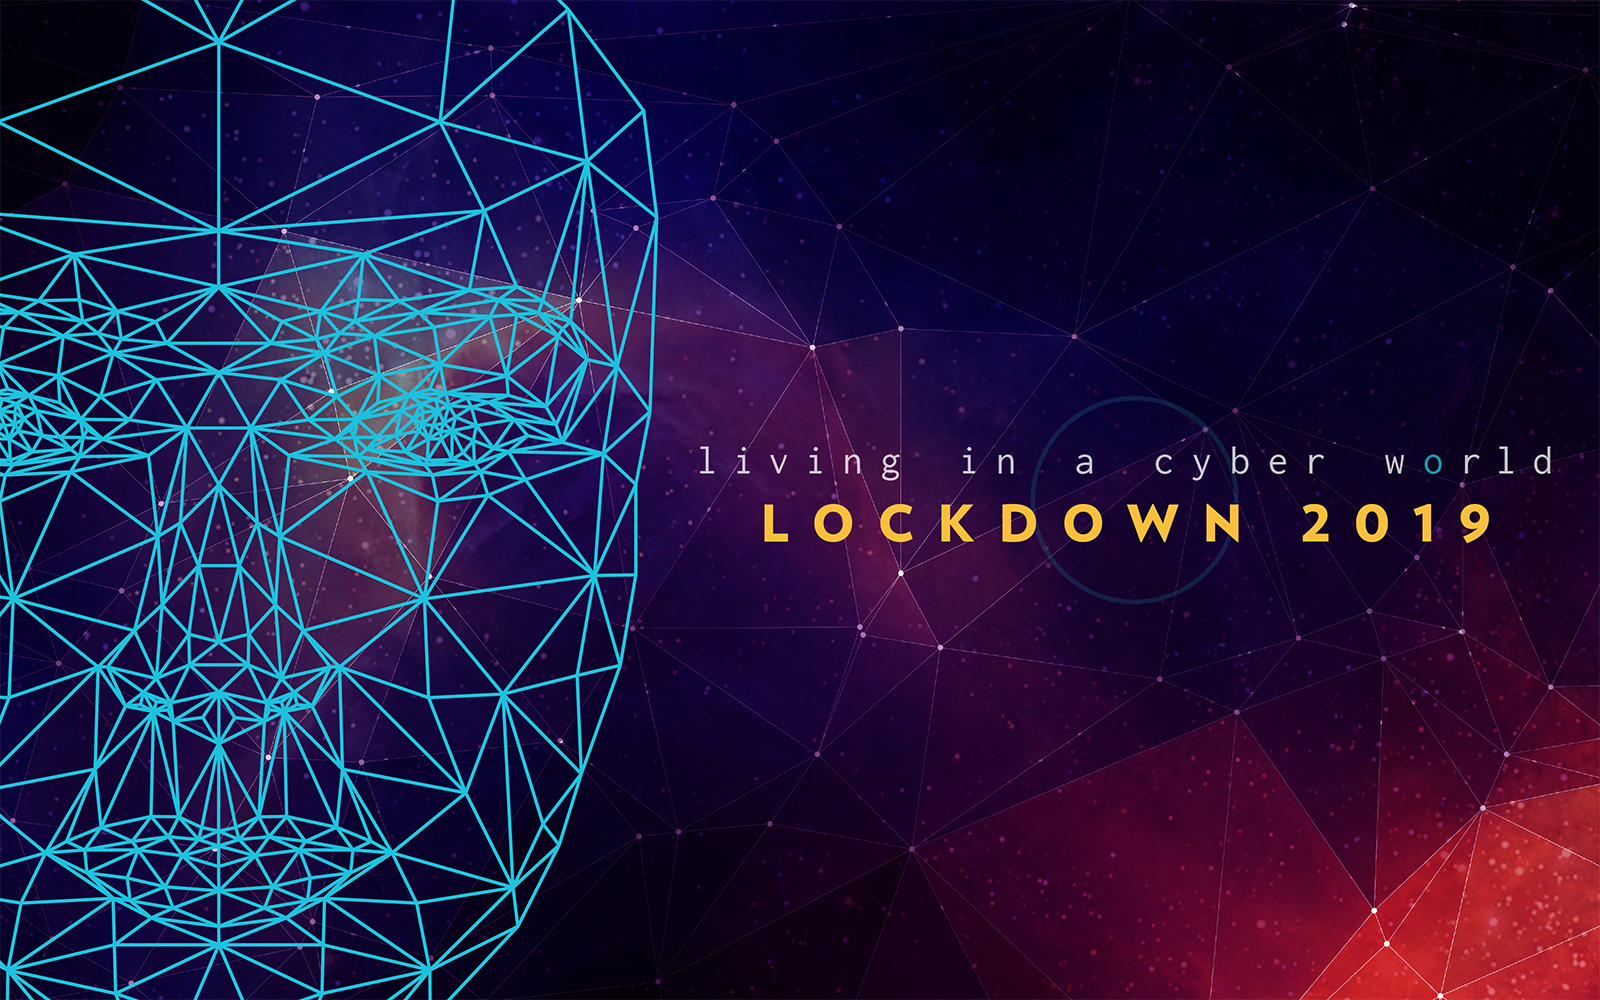 Lockdown, Living in a cyber world, with a polygonal human face overlayed over colorful space dust.